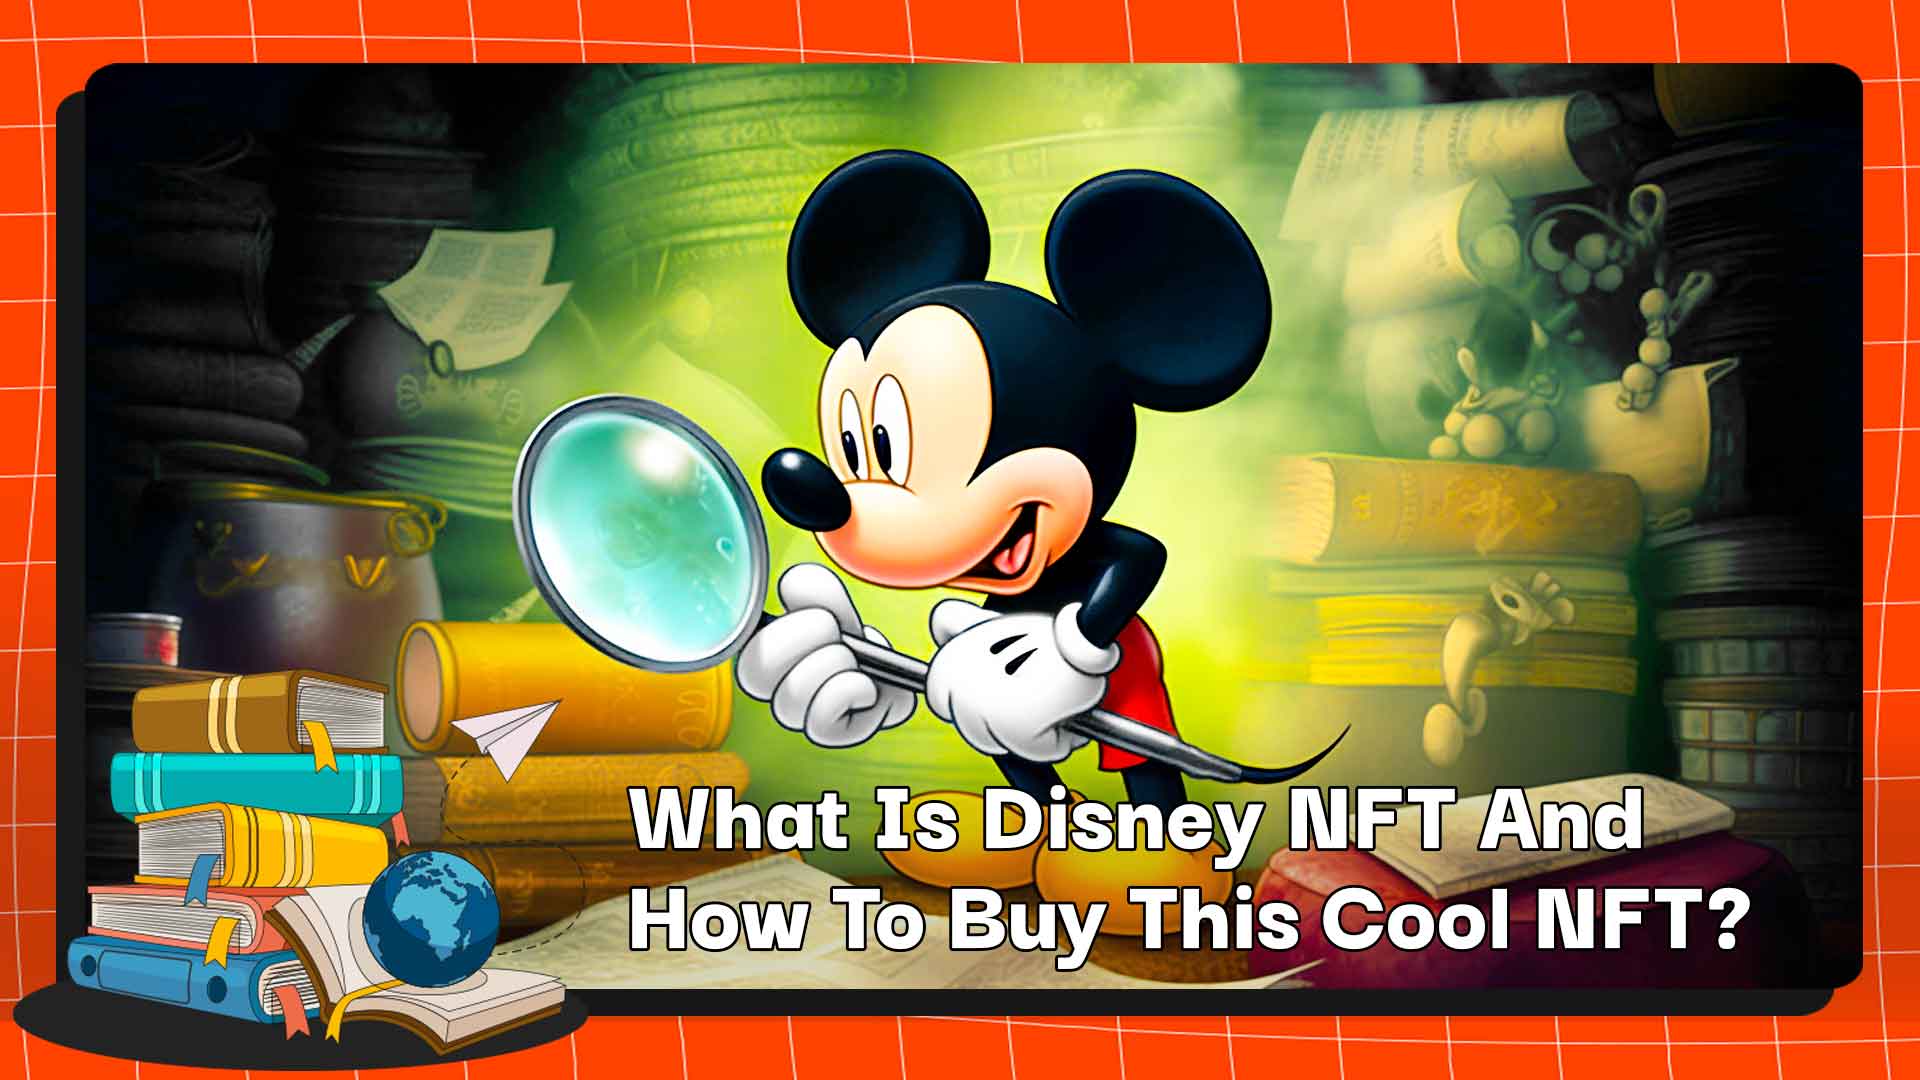 What Is Disney NFT And How To Buy This Cool NFT?